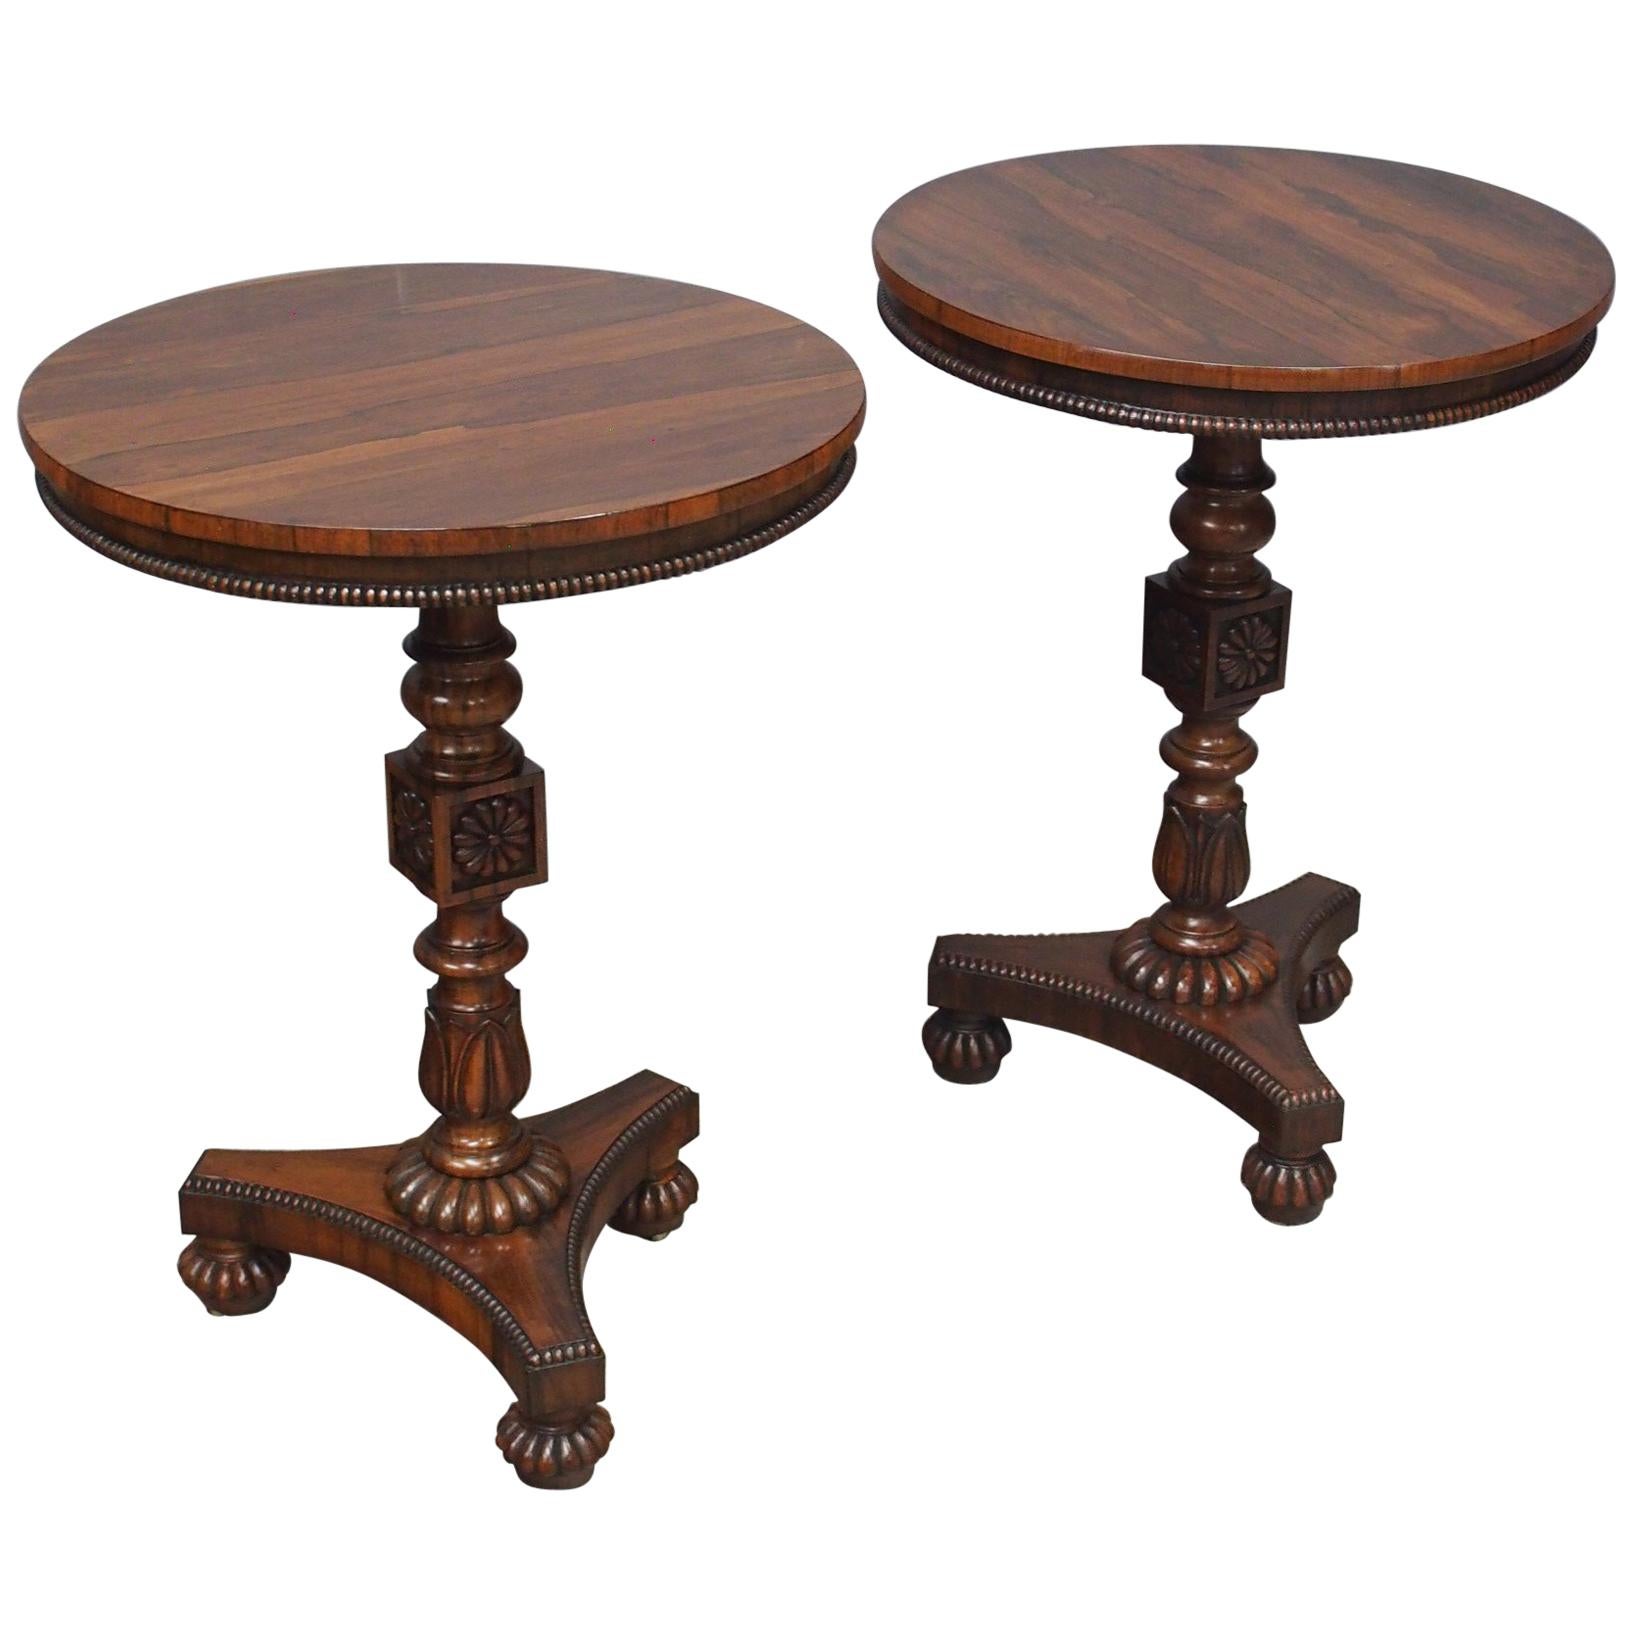 Pair of Rosewood and Goncalo Alves Occasional Tables